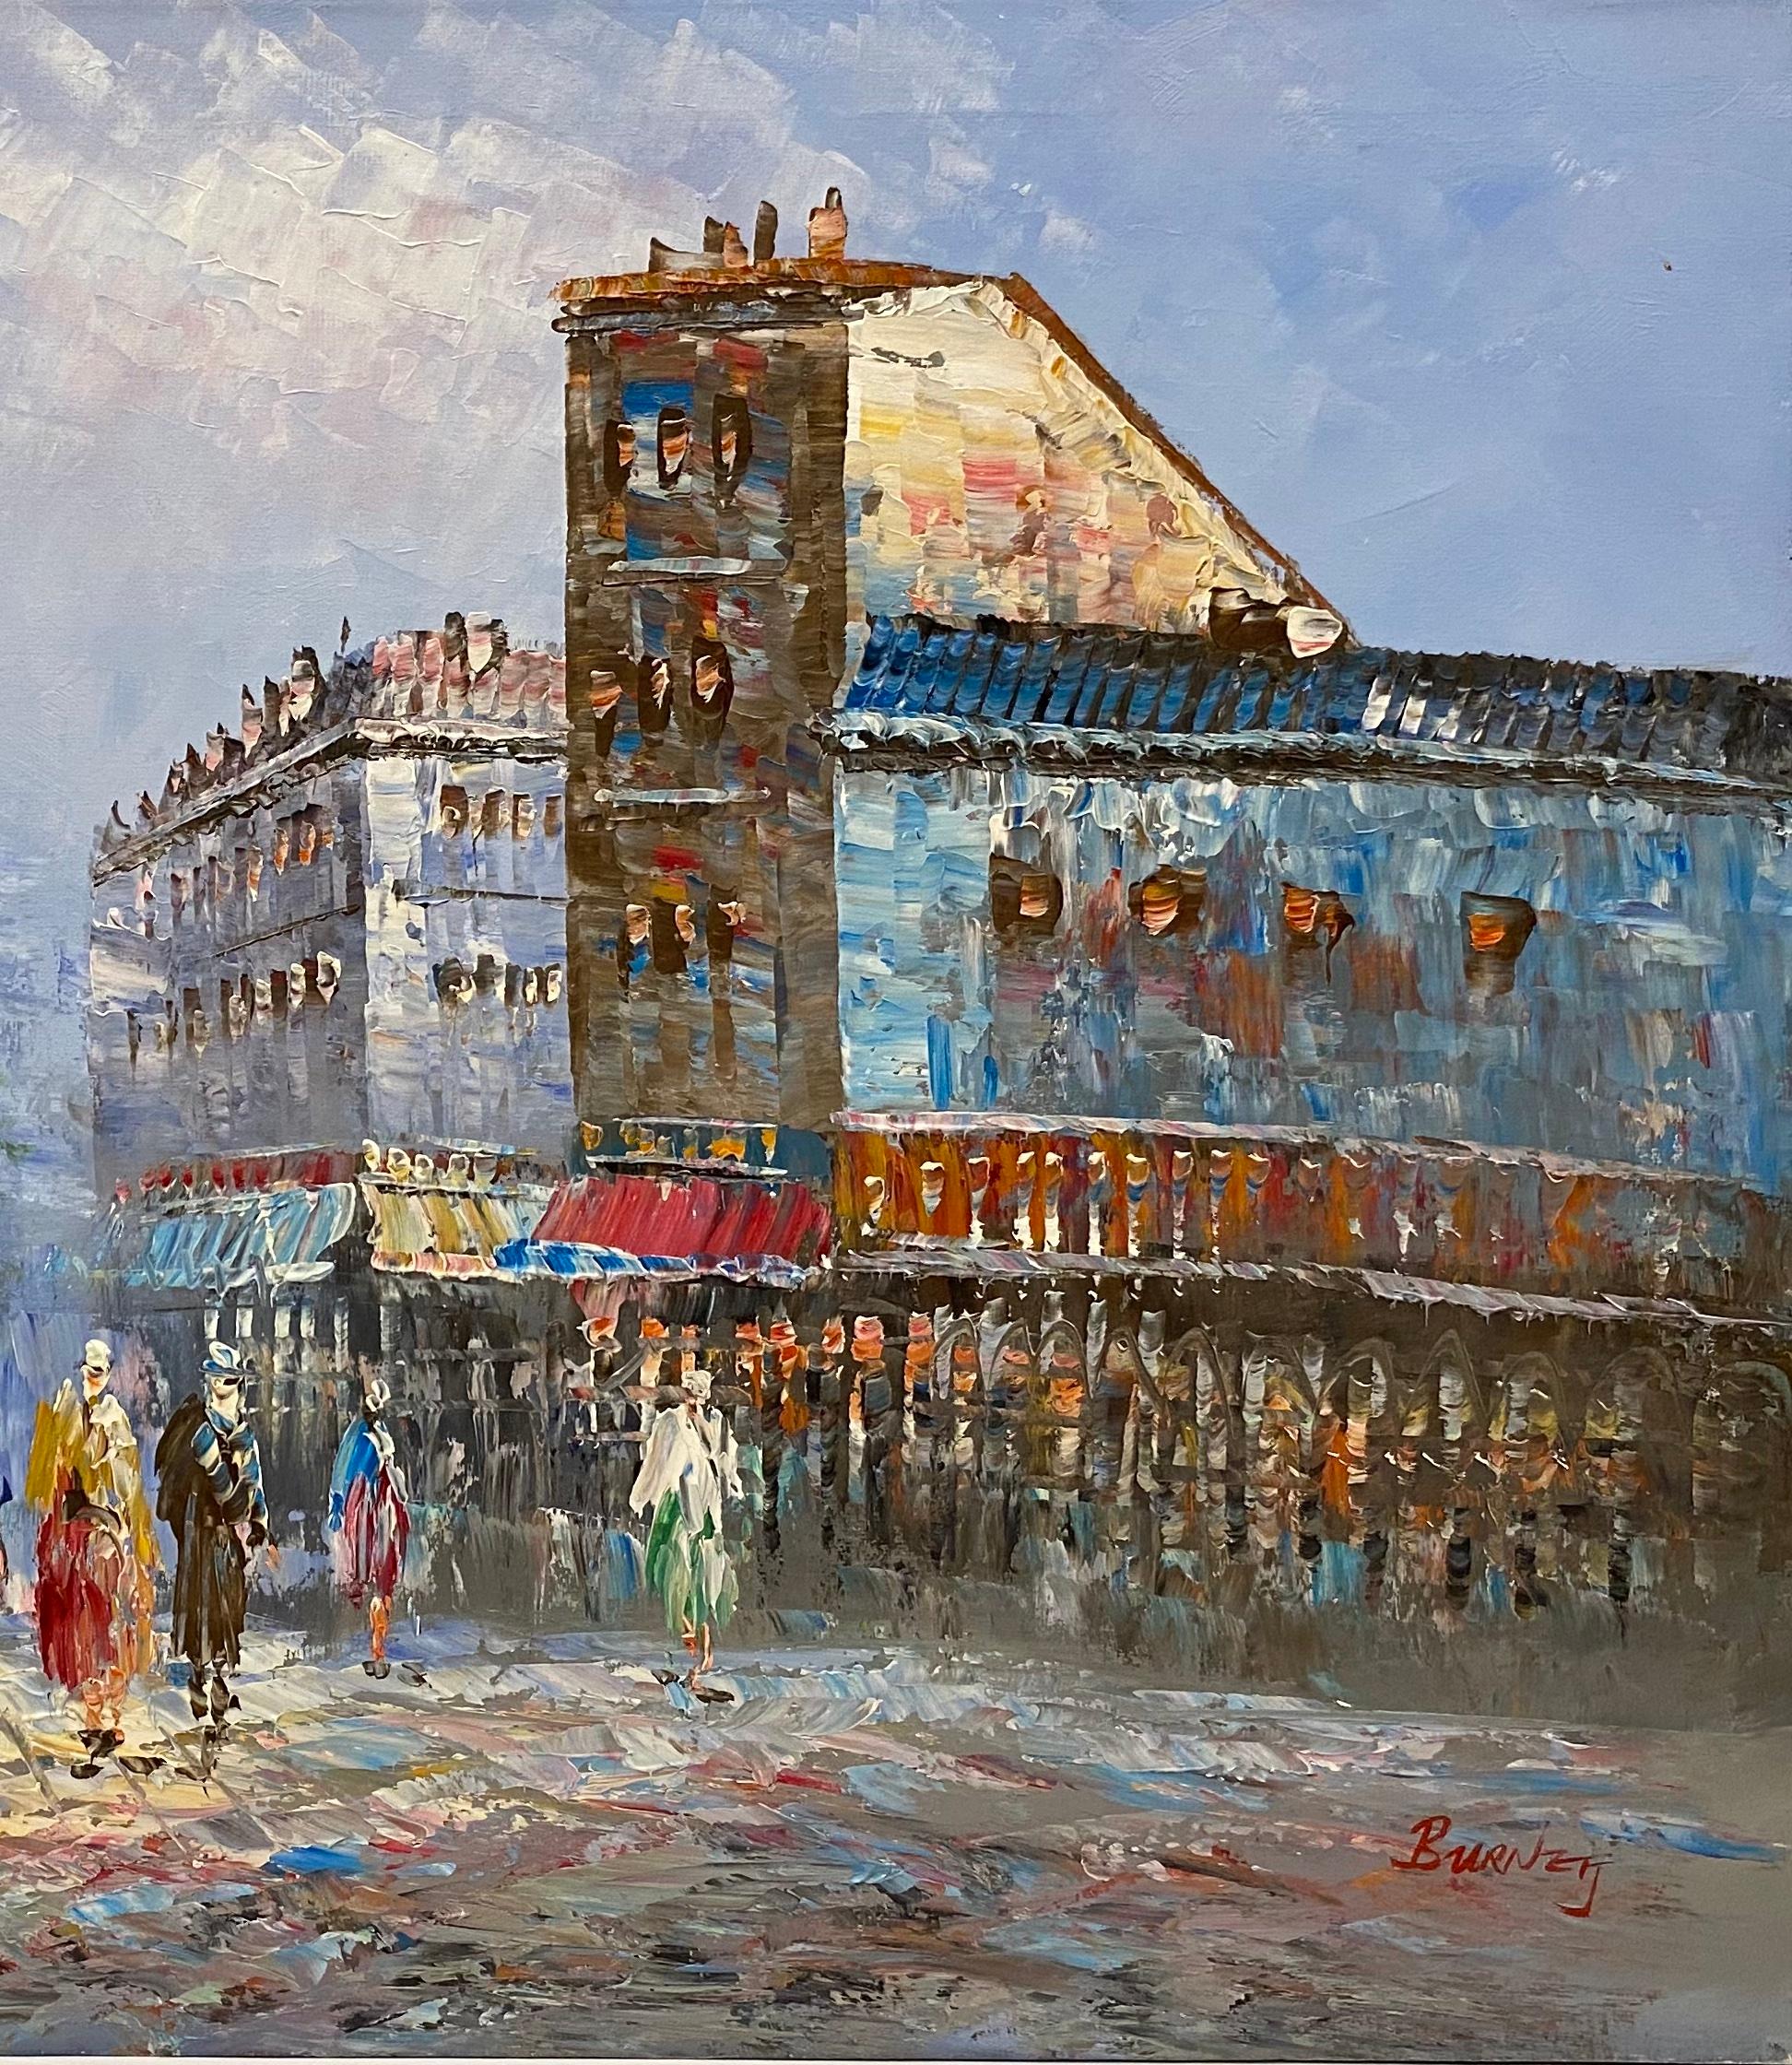 A beautiful original oil on canvas painting of a street scene in Paris, France. This painting perfectly depicts life in the 